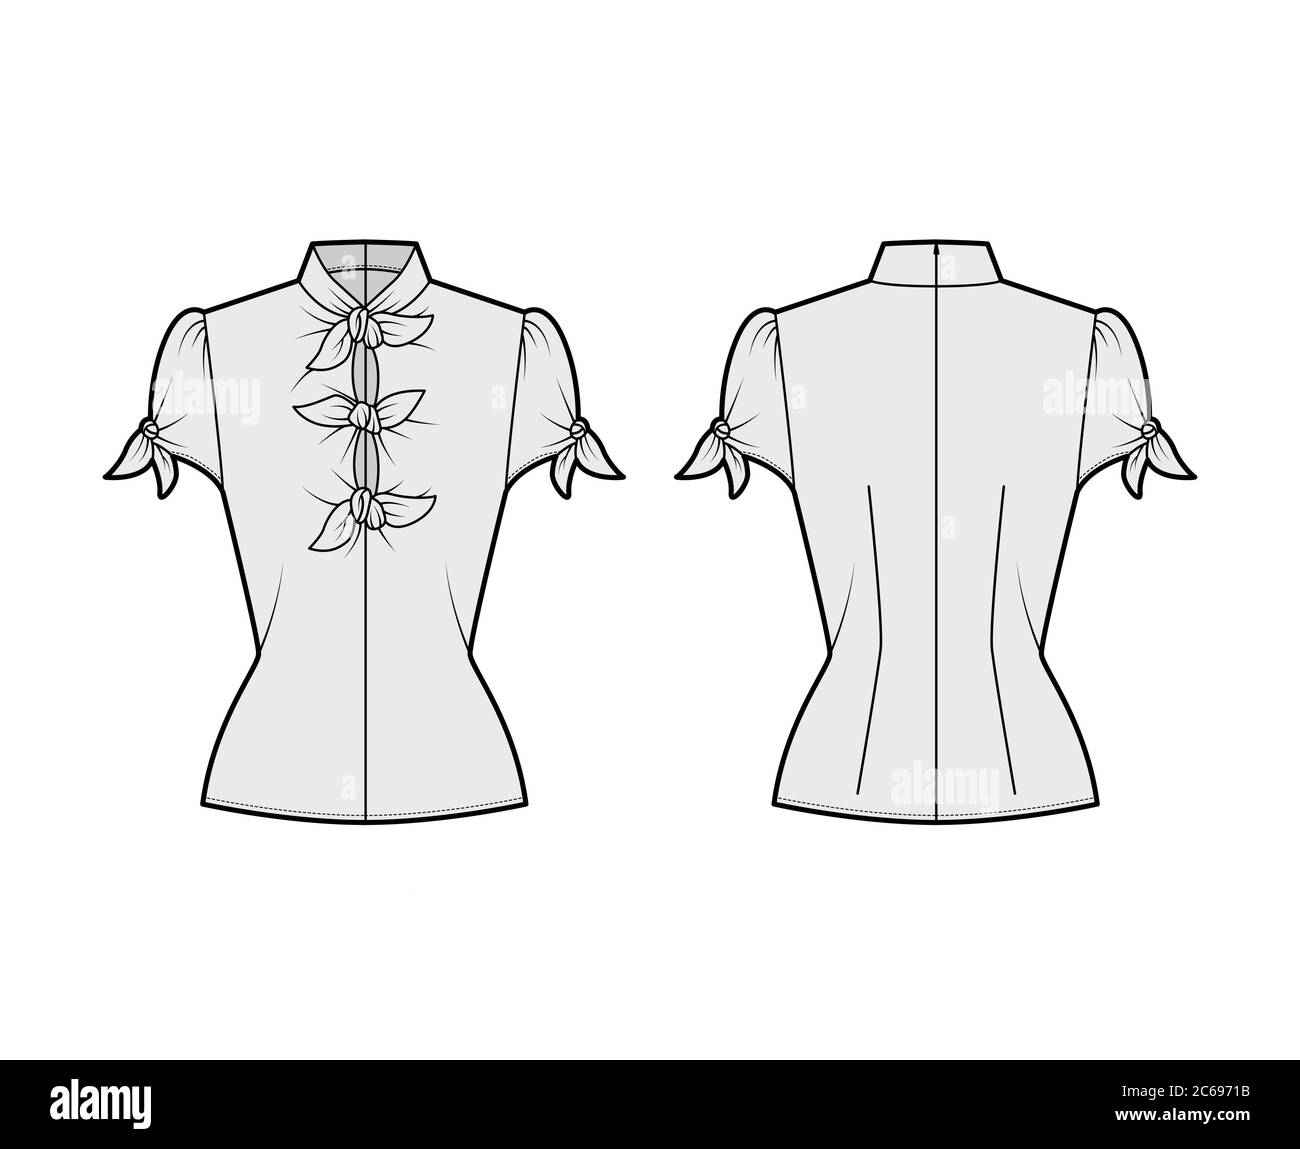 Knotted cutout blouse technical fashion illustration with high neckline, puffed volume sleeves, back zip fastening. Flat apparel template front, back grey color. Women men unisex garment CAD mockup Stock Vector